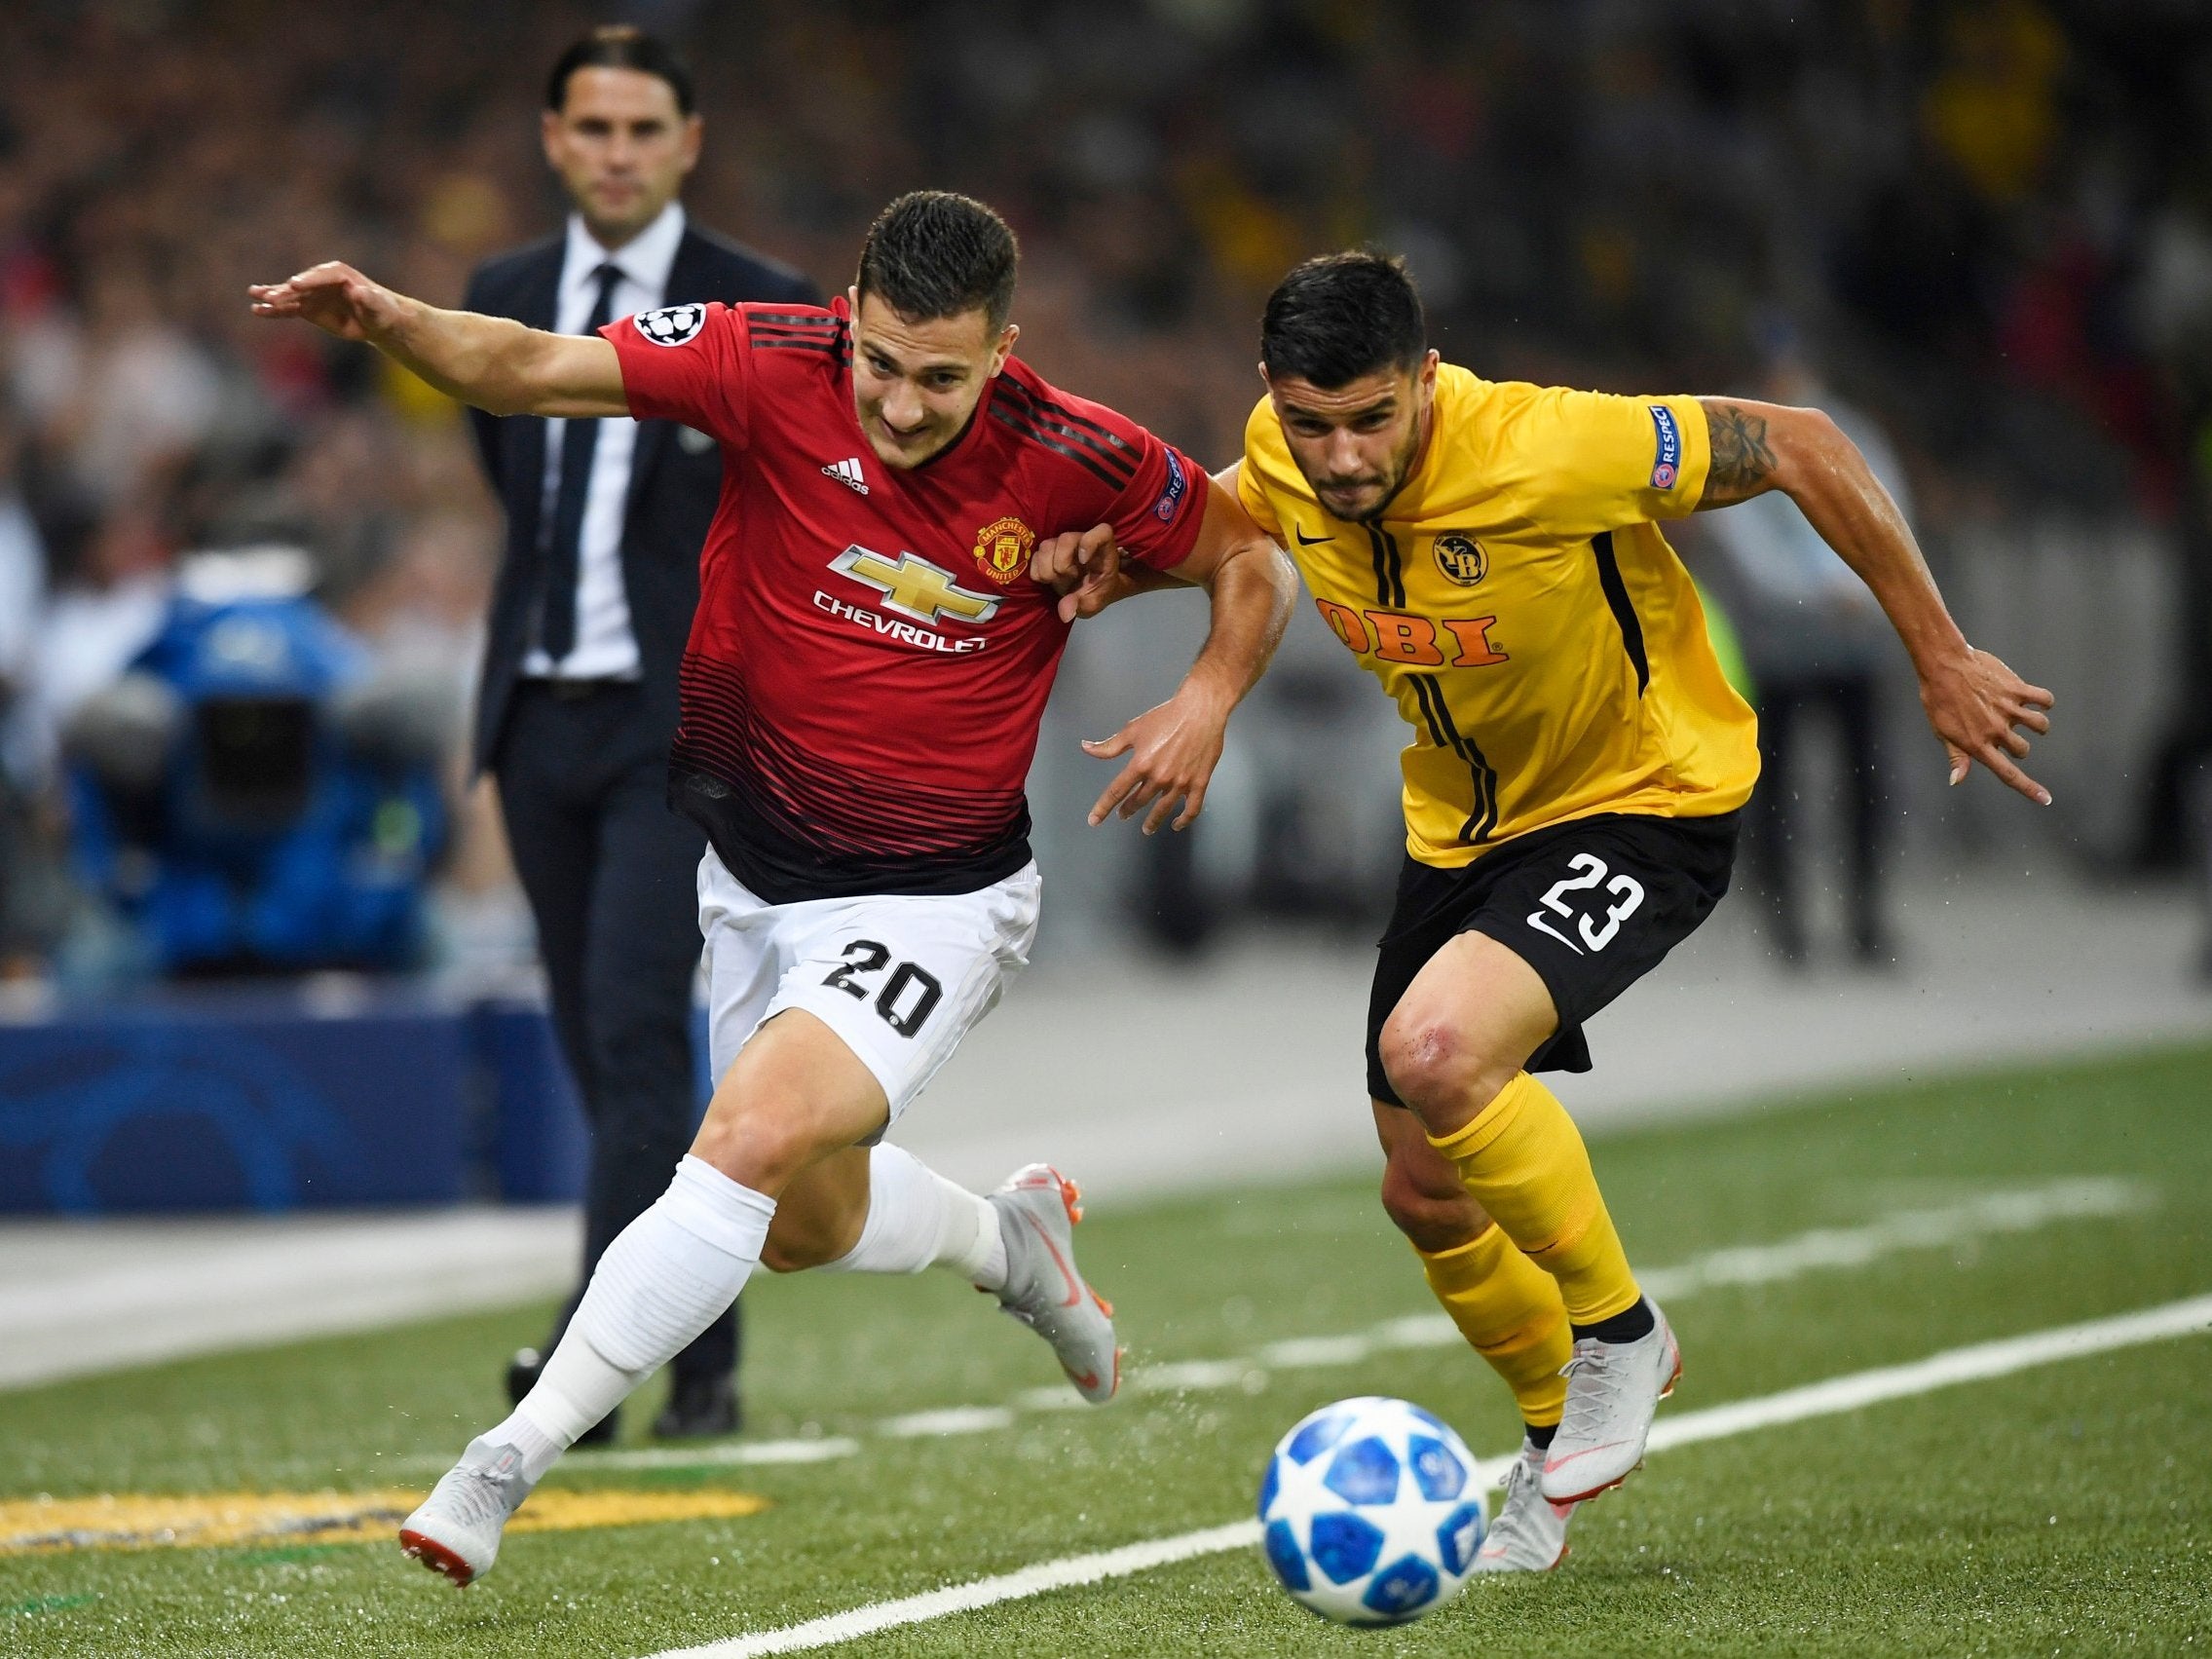 Diogo Dalot's attacking instincts on debut offer glimpse of more dynamic Manchester United to rival City strengths